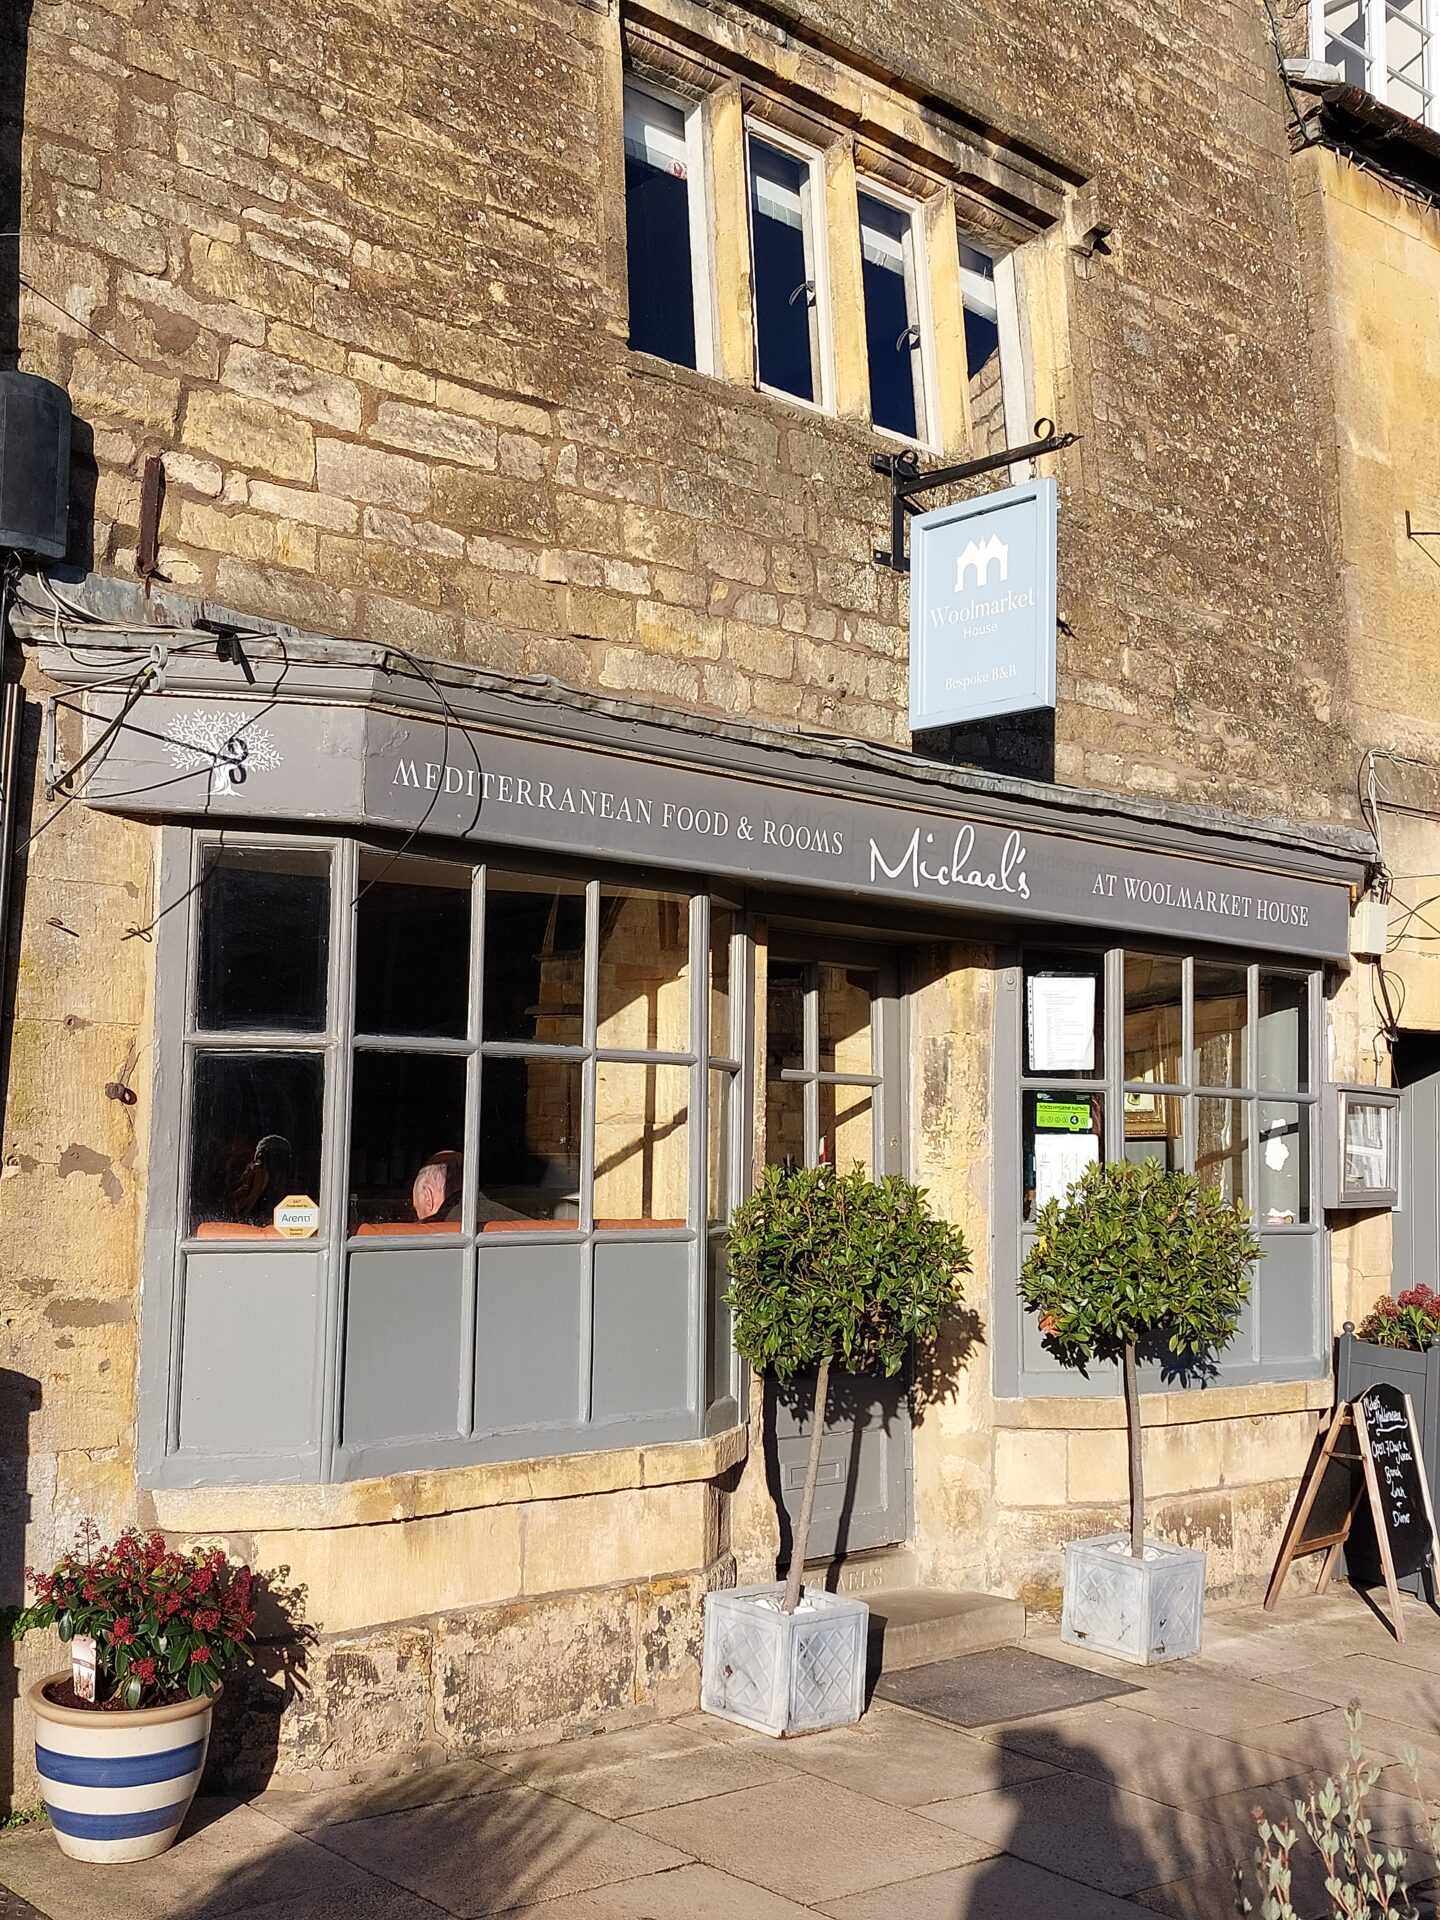 Places to Eat in Chipping Campden - Michaels Mediterranean rstaurant